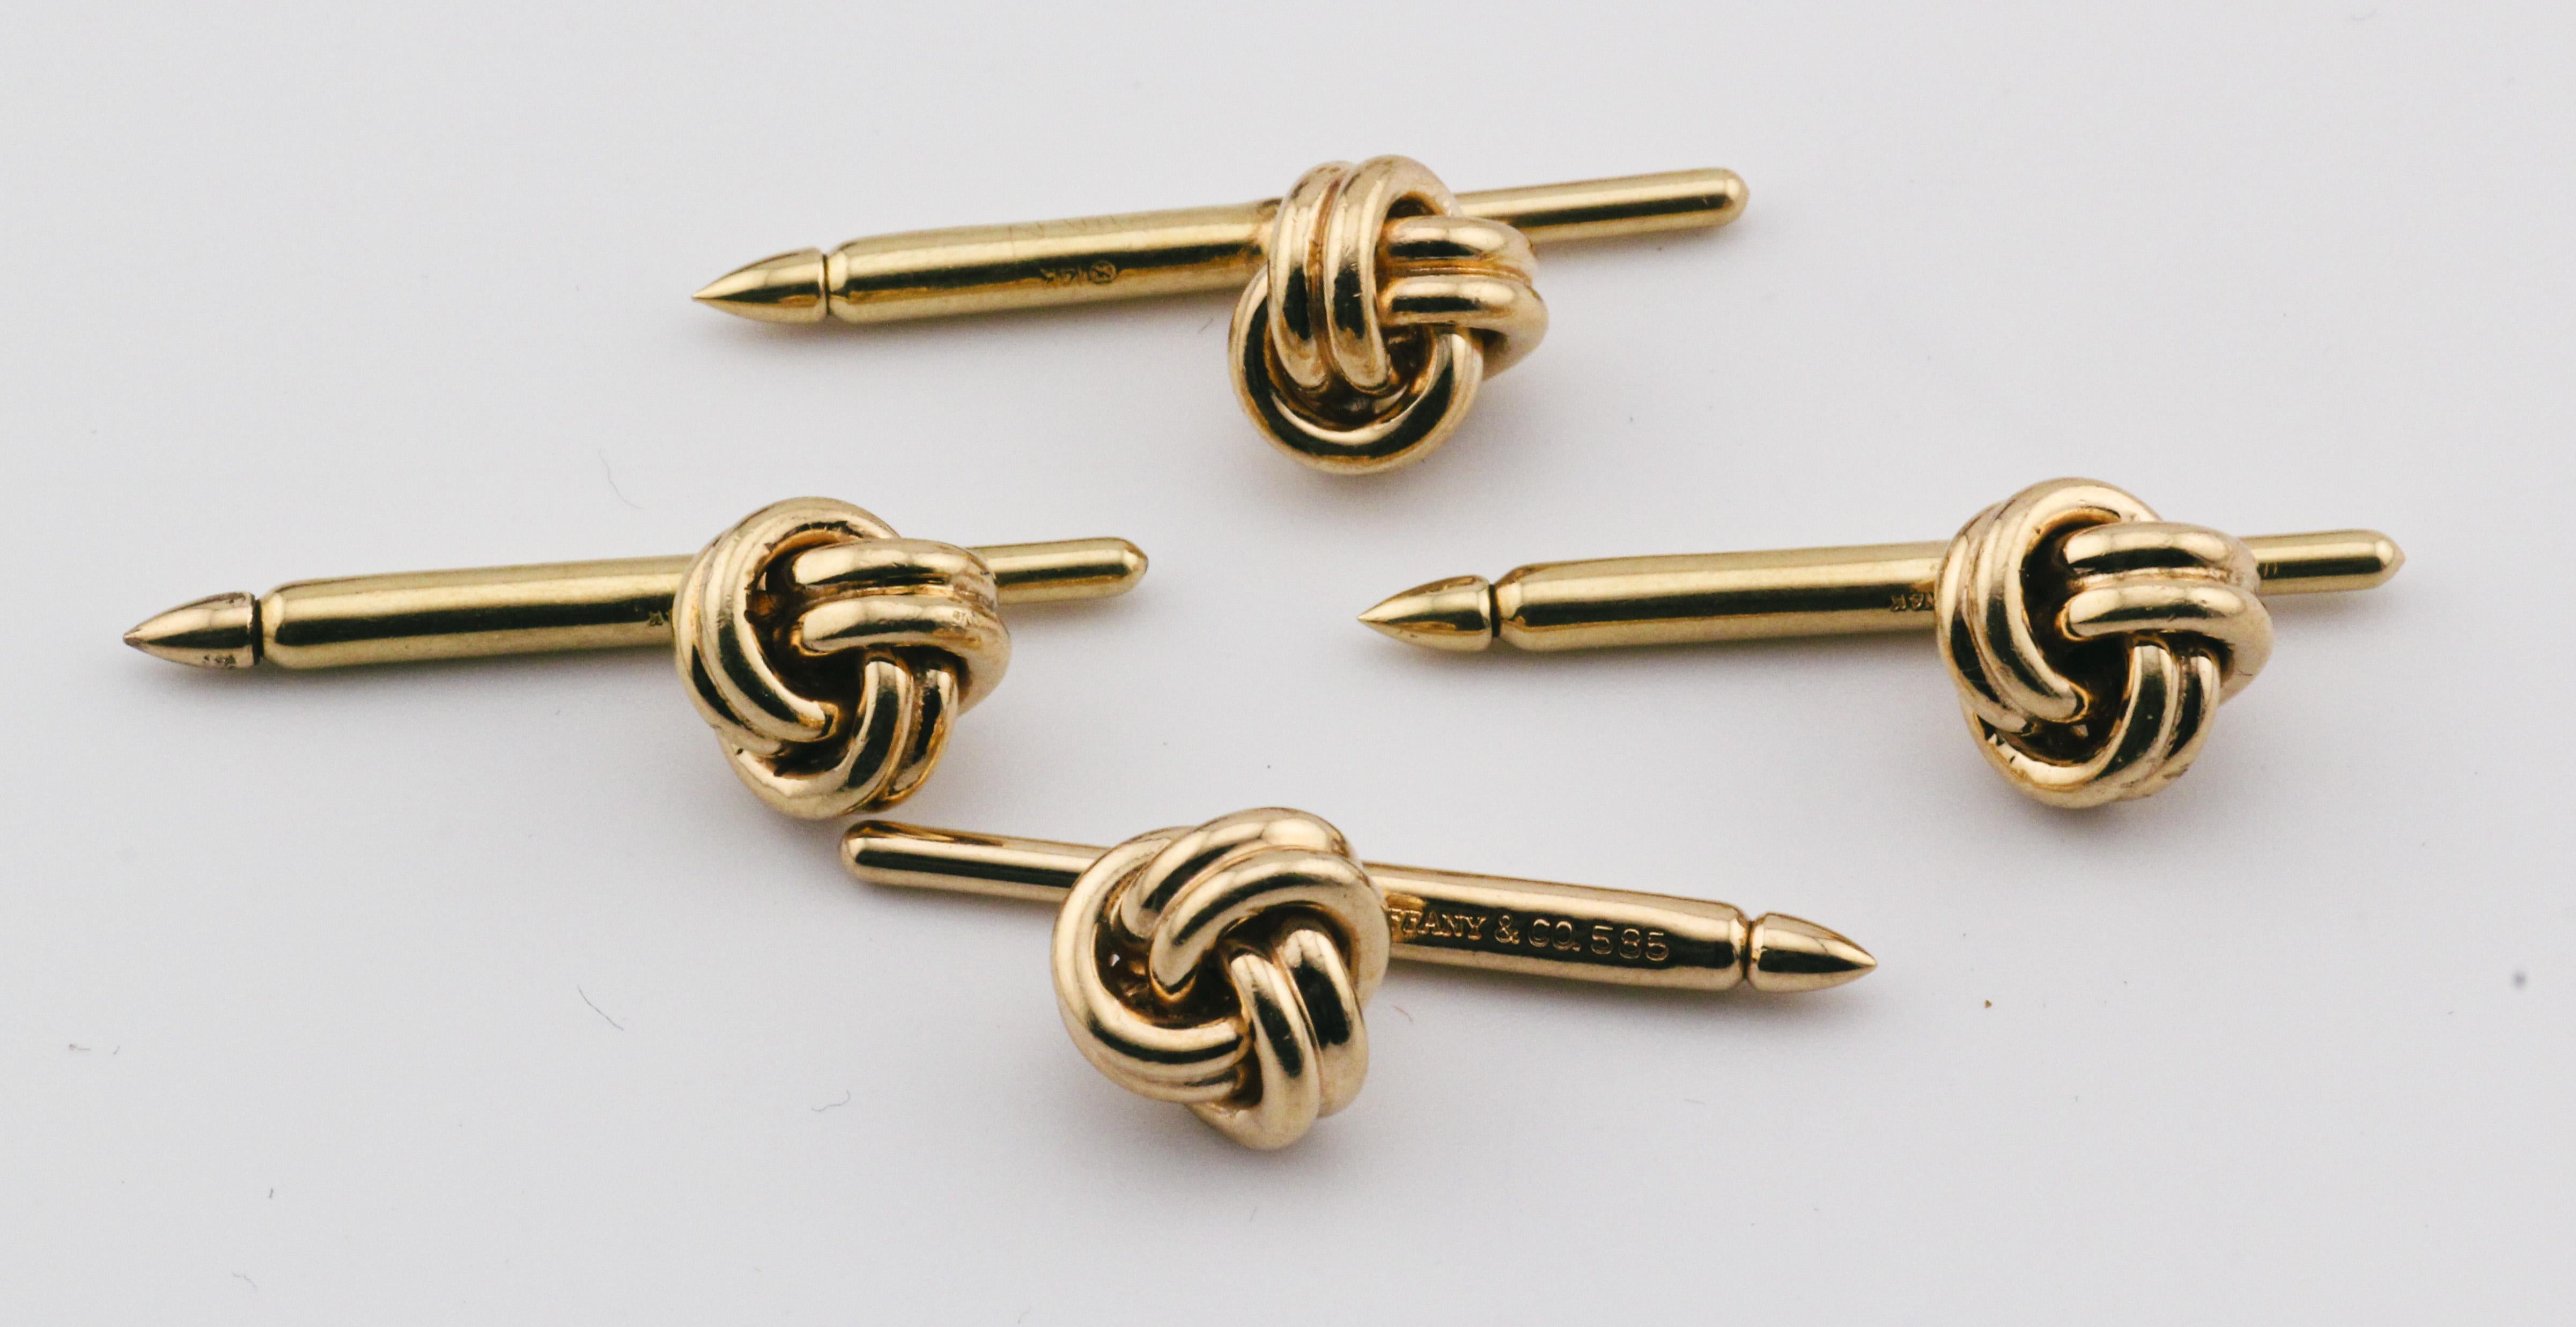 Indulge in the epitome of sophistication and refinement with the Tiffany & Co. 14K Yellow Gold Knot Cufflinks and 4 Studs Set. Crafted with the utmost precision and elegance, this exquisite set exemplifies Tiffany's legacy of luxury and timeless